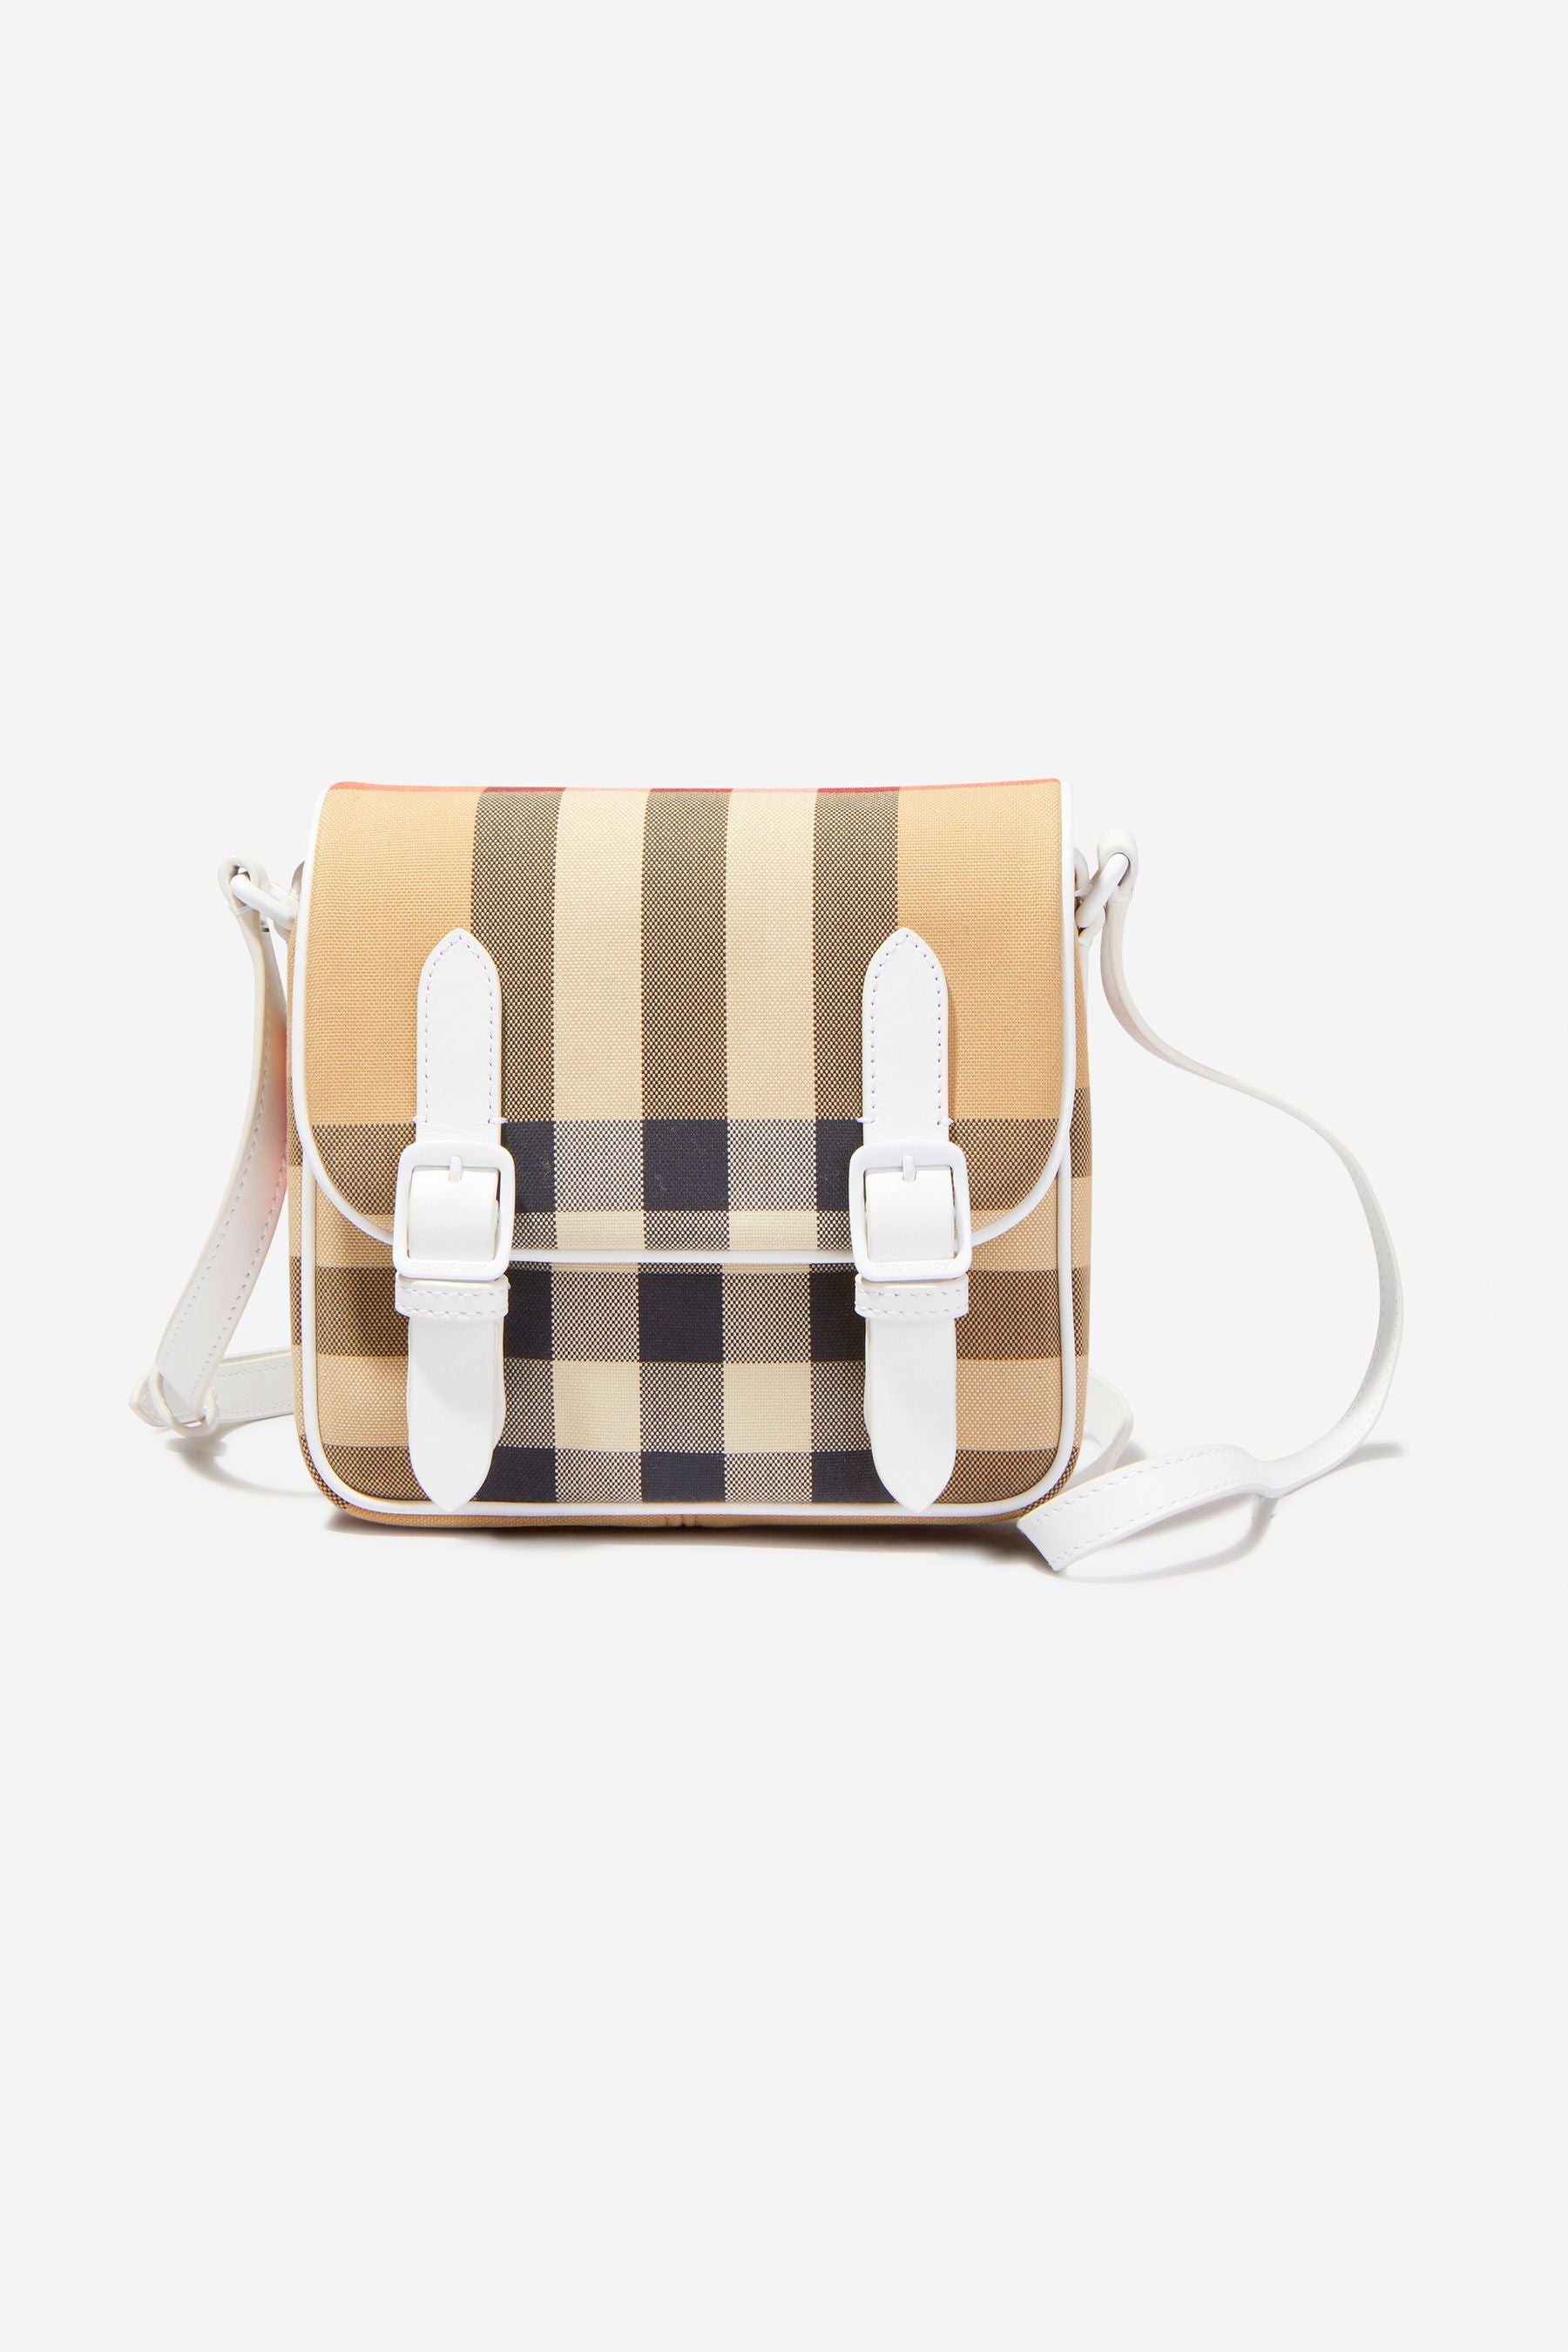 DKNY Shoulder & Sling Bags outlet - 1800 products on sale